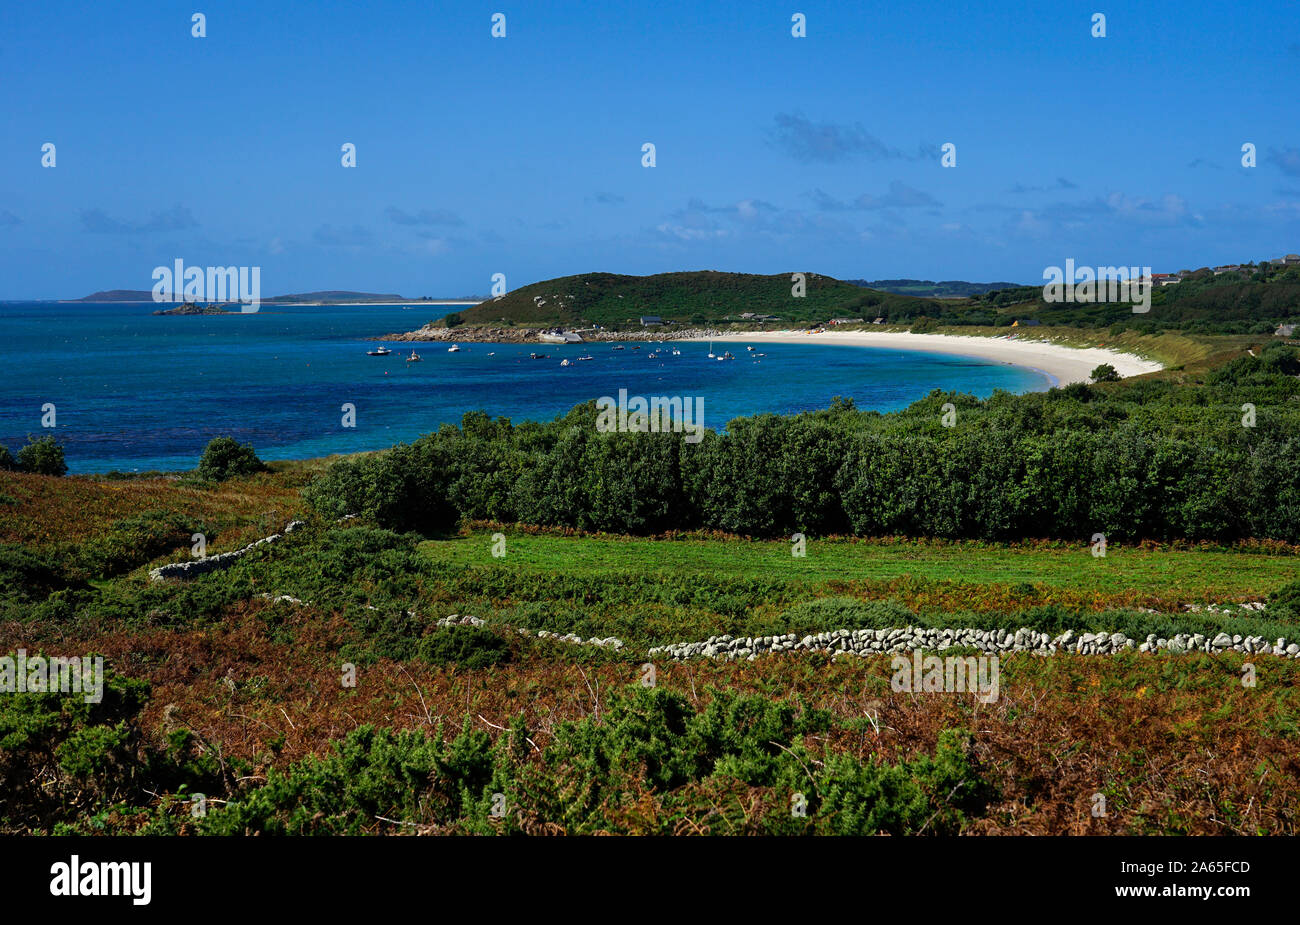 St Martin's,Scilly Islands, England, Europe Stock Photo